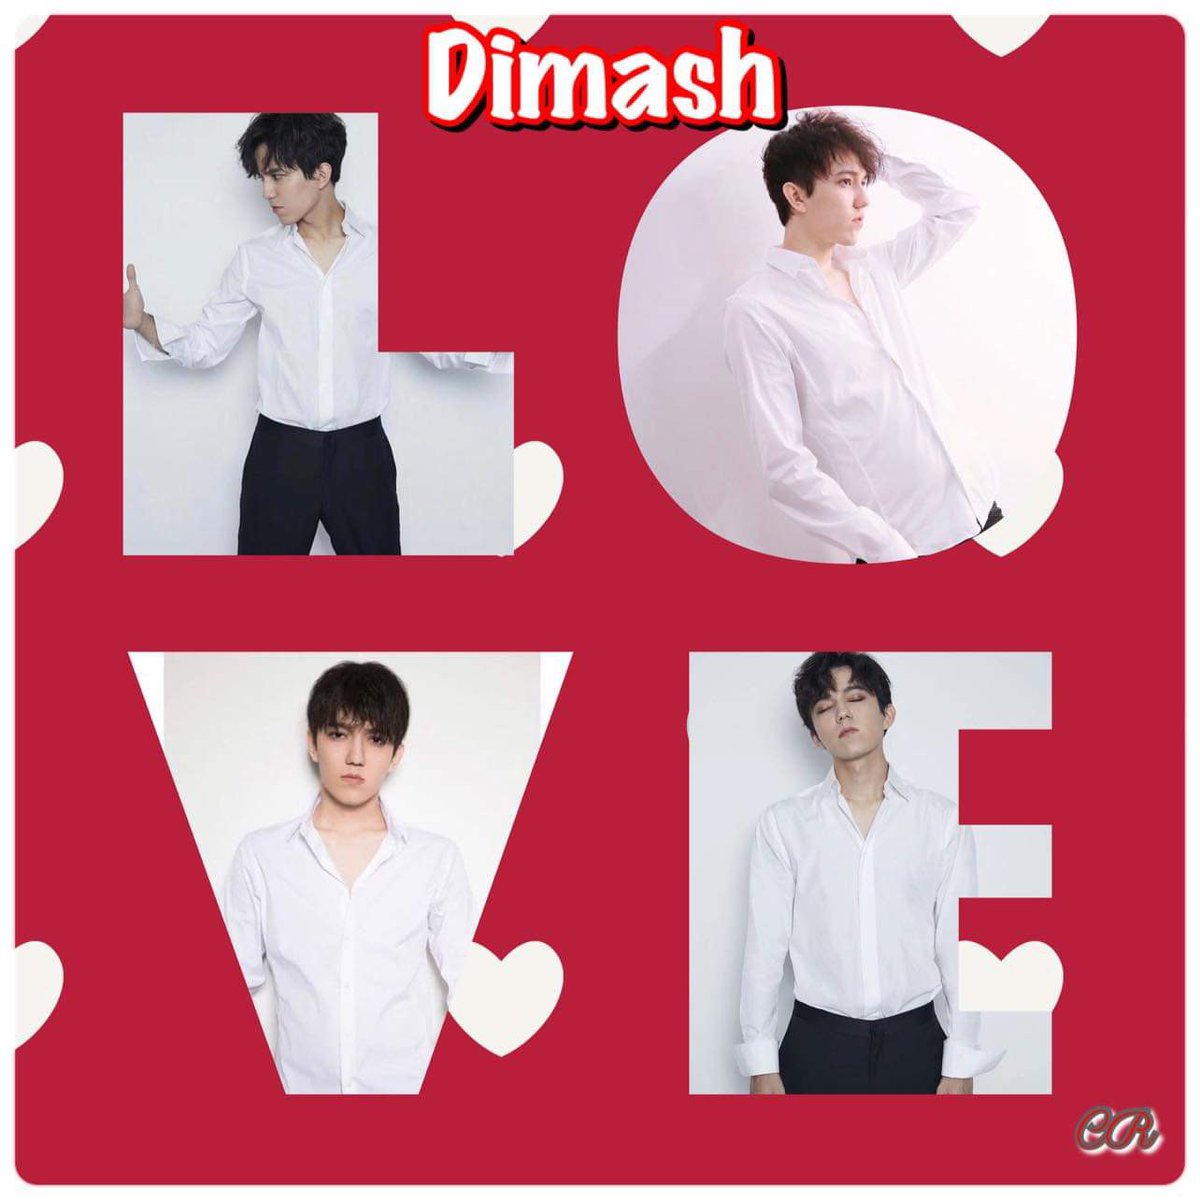 @Dimaterry1 @DiDearsHispanos @dimash_official I feel the same. My world now has expanded a lot in the last 3 years. He shares his richness with everyone. Knowing him and sharing with his Dears it’s just a beautiful experience! DIMASH VOICE OF KAZAKHSTAN #DimashOnYouTube #ElAmorEnTi